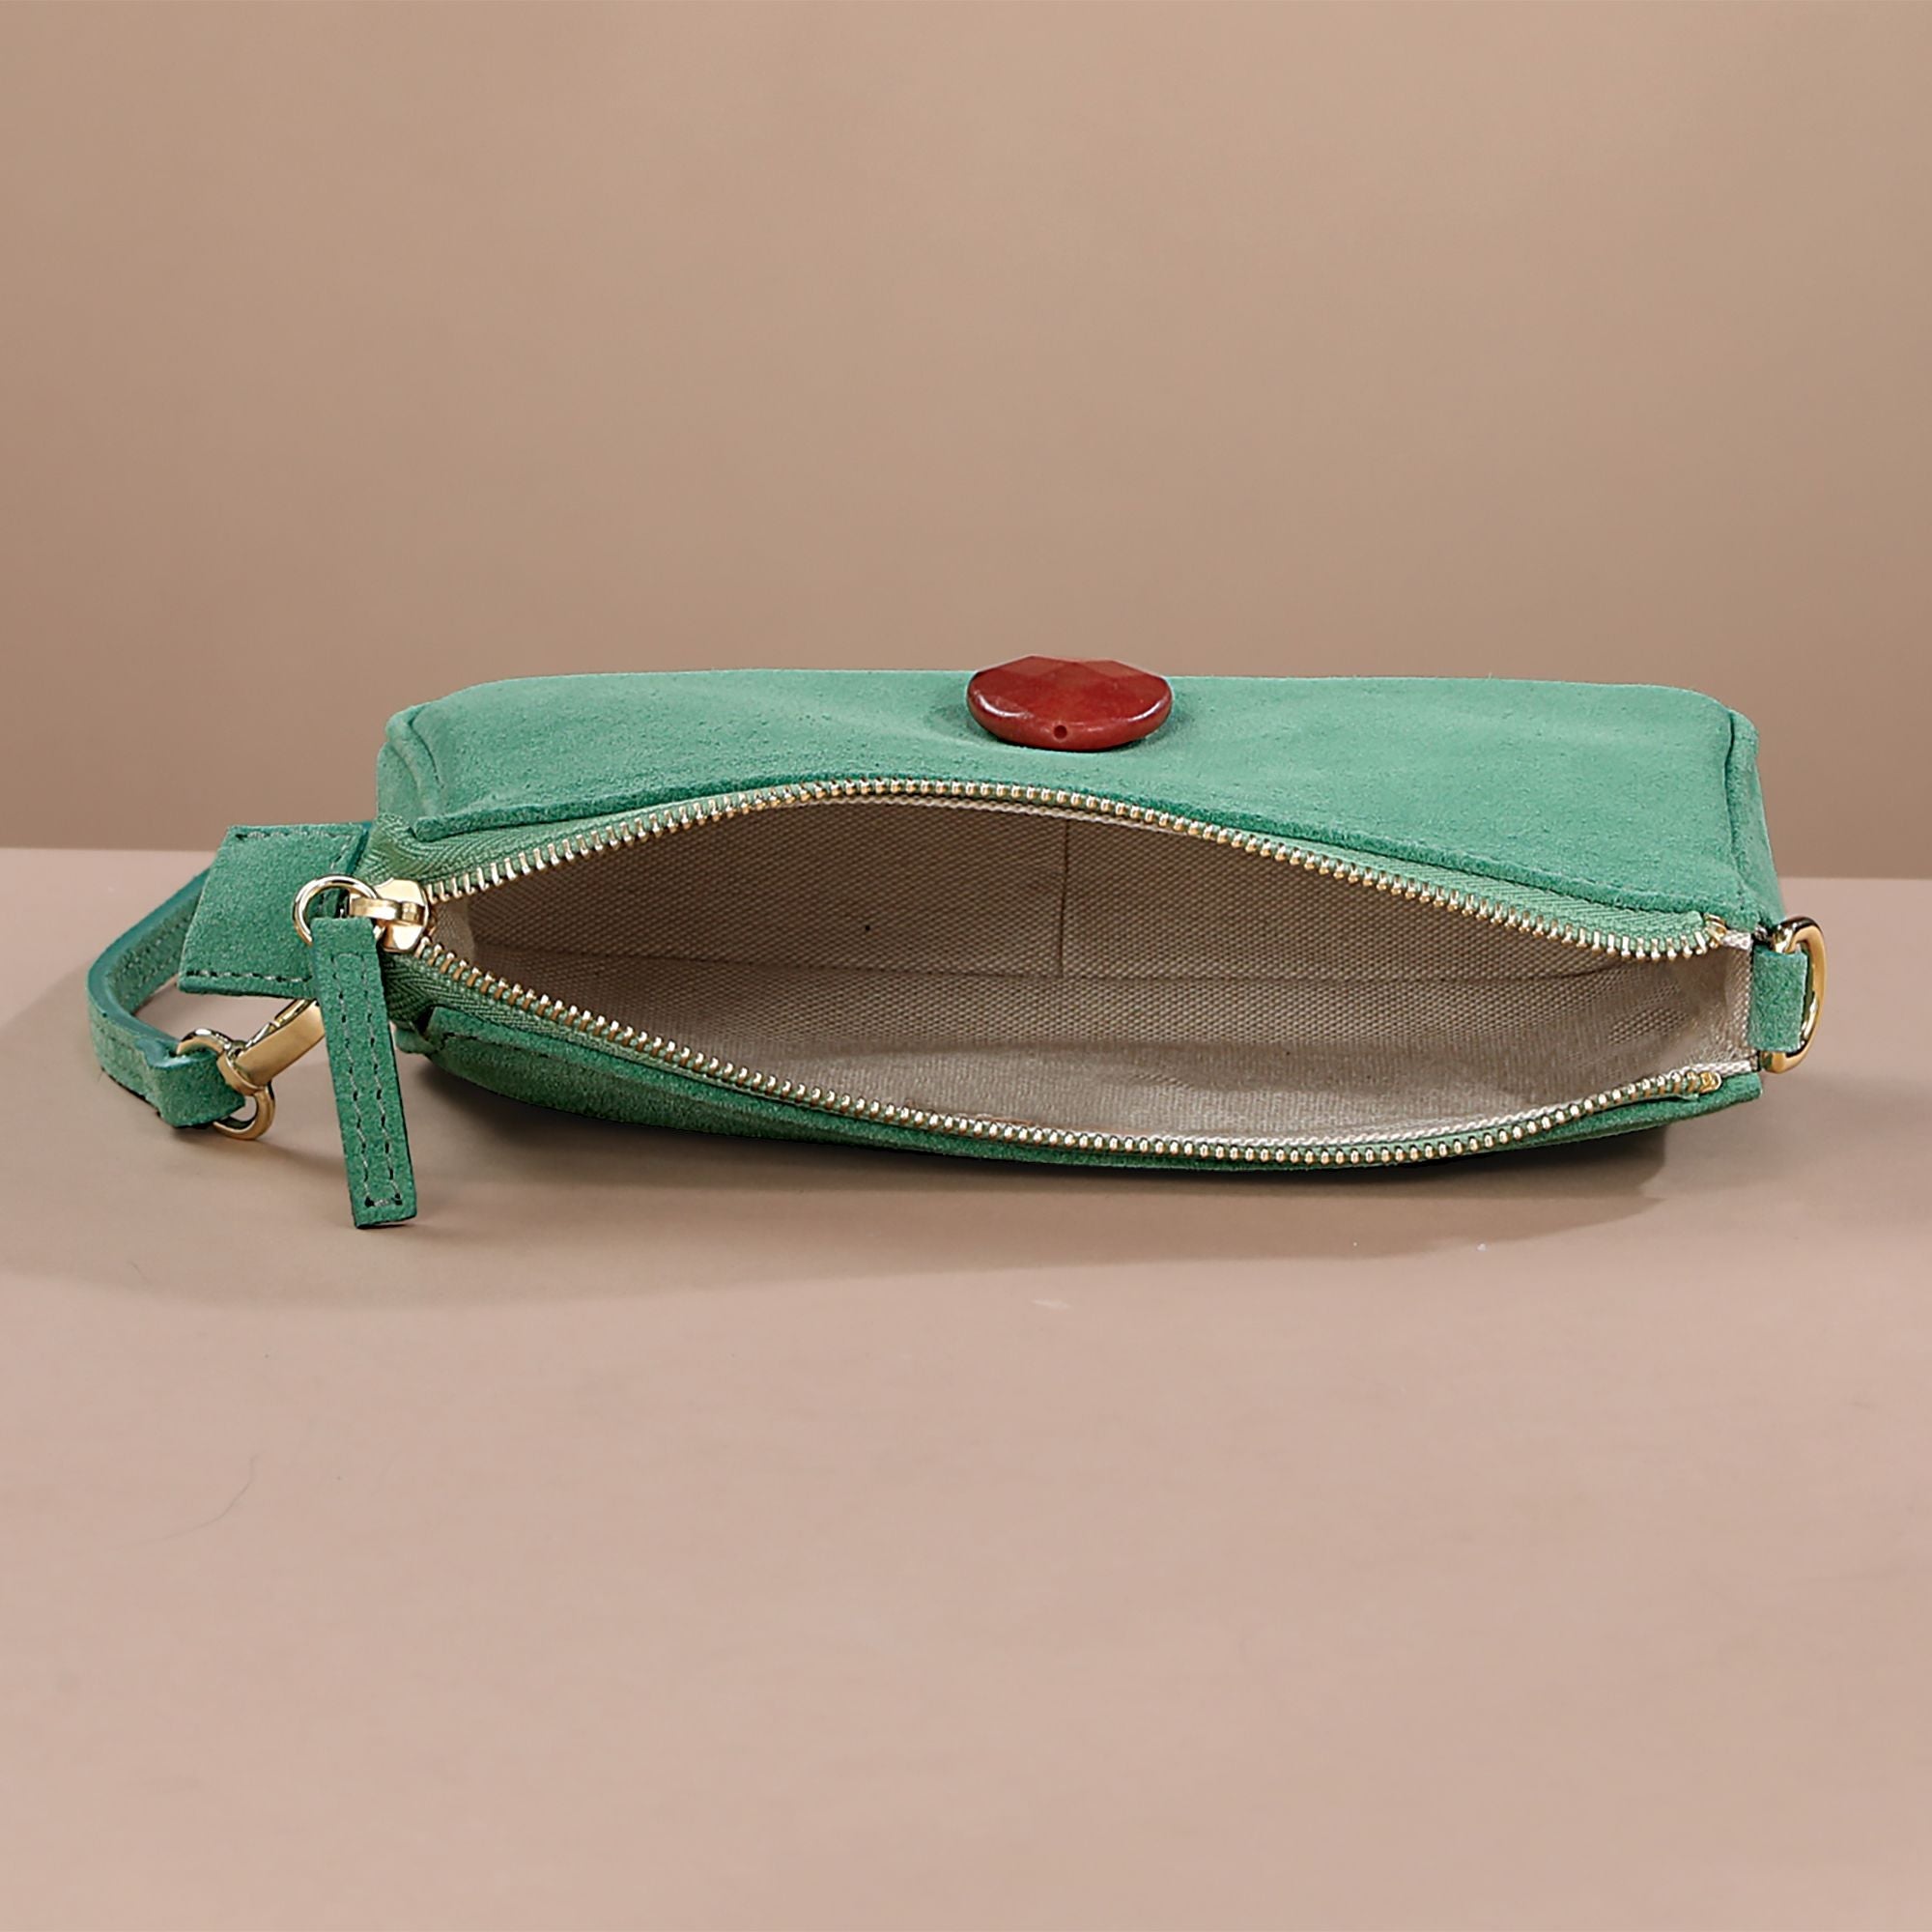 Florentine Suede Green Crossbody With Coral Stone